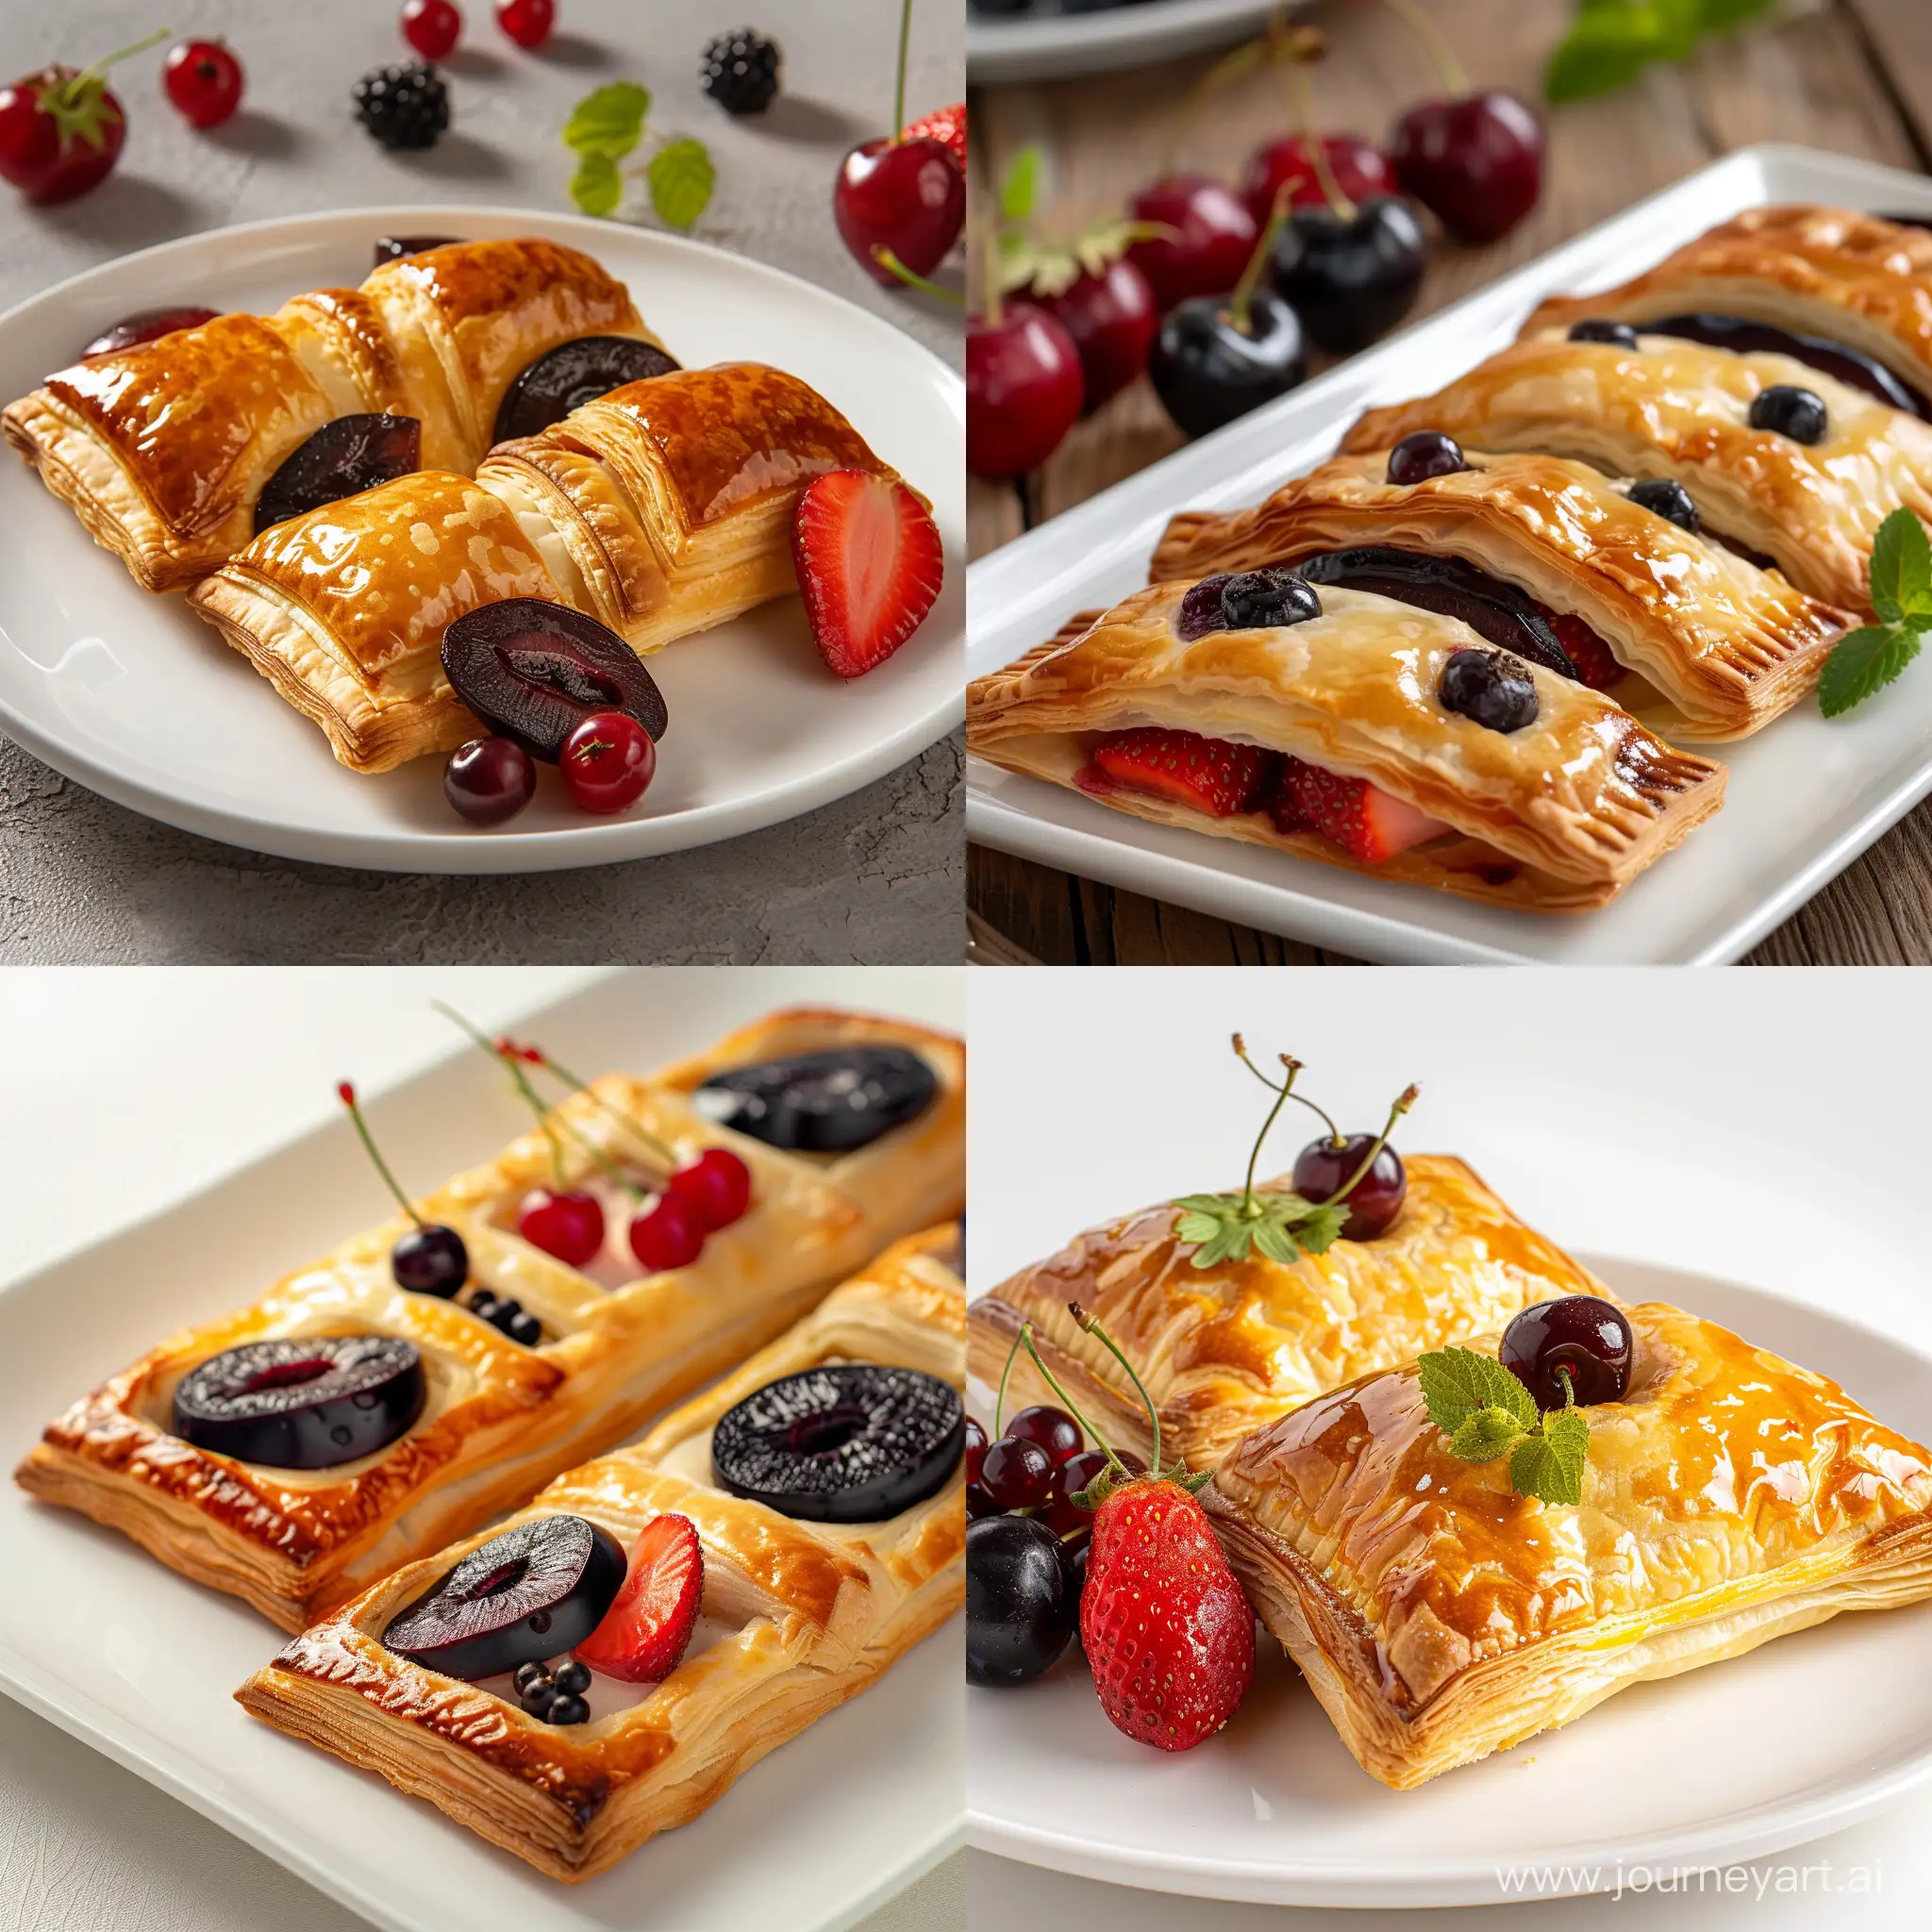 Assorted-Fruit-Tarts-on-White-Plate-Crispy-Golden-Puff-Pastry-Pastries-with-Plum-Cherry-Strawberry-and-Black-Currant